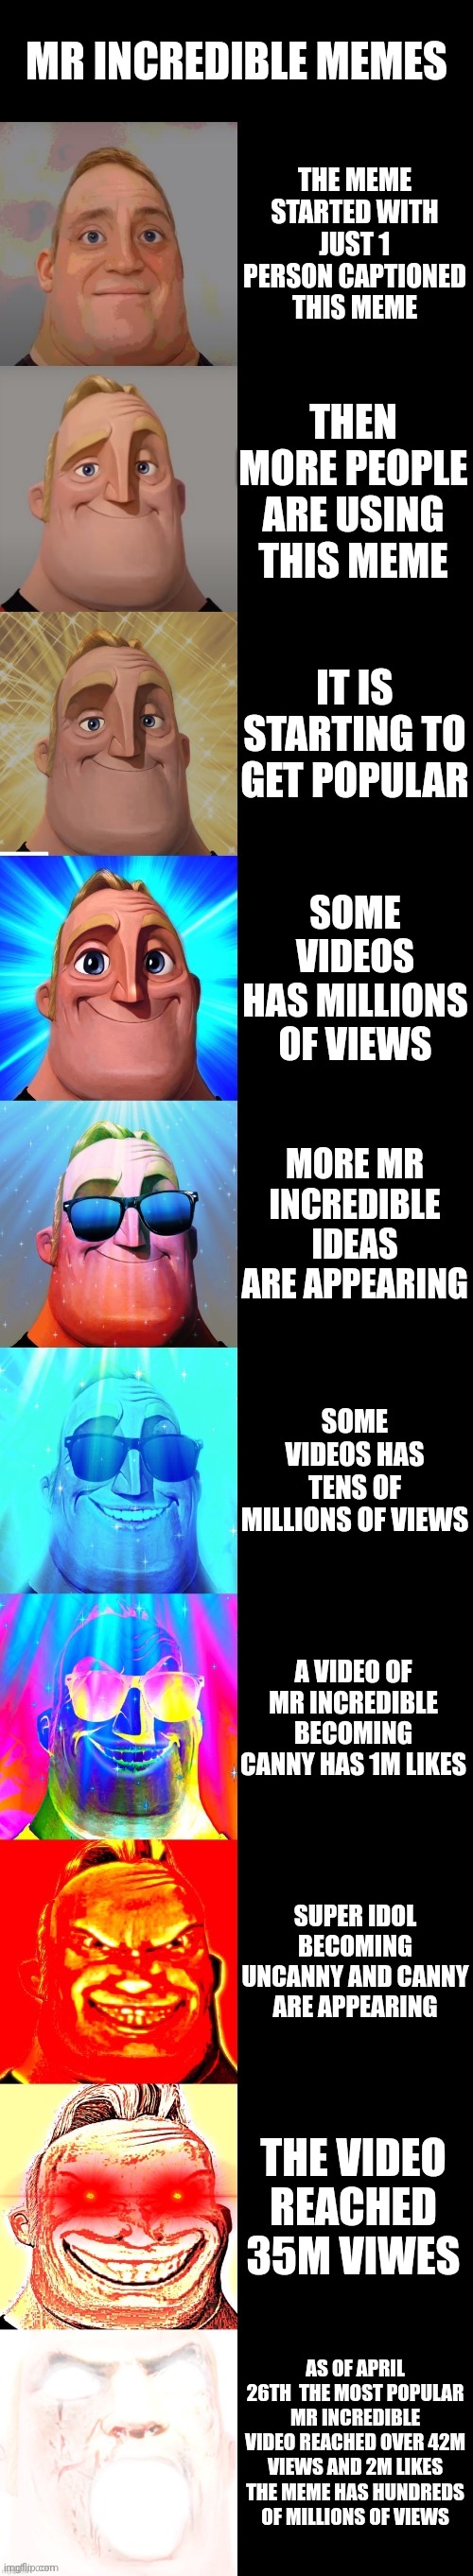 mr incredible becoming canny | MR INCREDIBLE MEMES; THE MEME STARTED WITH JUST 1 PERSON CAPTIONED THIS MEME; THEN MORE PEOPLE ARE USING THIS MEME; IT IS STARTING TO GET POPULAR; SOME VIDEOS HAS MILLIONS OF VIEWS; MORE MR INCREDIBLE IDEAS ARE APPEARING; SOME VIDEOS HAS TENS OF MILLIONS OF VIEWS; A VIDEO OF MR INCREDIBLE BECOMING CANNY HAS 1M LIKES; SUPER IDOL BECOMING UNCANNY AND CANNY ARE APPEARING; THE VIDEO REACHED 35M VIWES; AS OF APRIL 26TH  THE MOST POPULAR MR INCREDIBLE VIDEO REACHED OVER 42M VIEWS AND 2M LIKES THE MEME HAS HUNDREDS OF MILLIONS OF VIEWS | image tagged in mr incredible becoming canny,mr incredible,memes | made w/ Imgflip meme maker